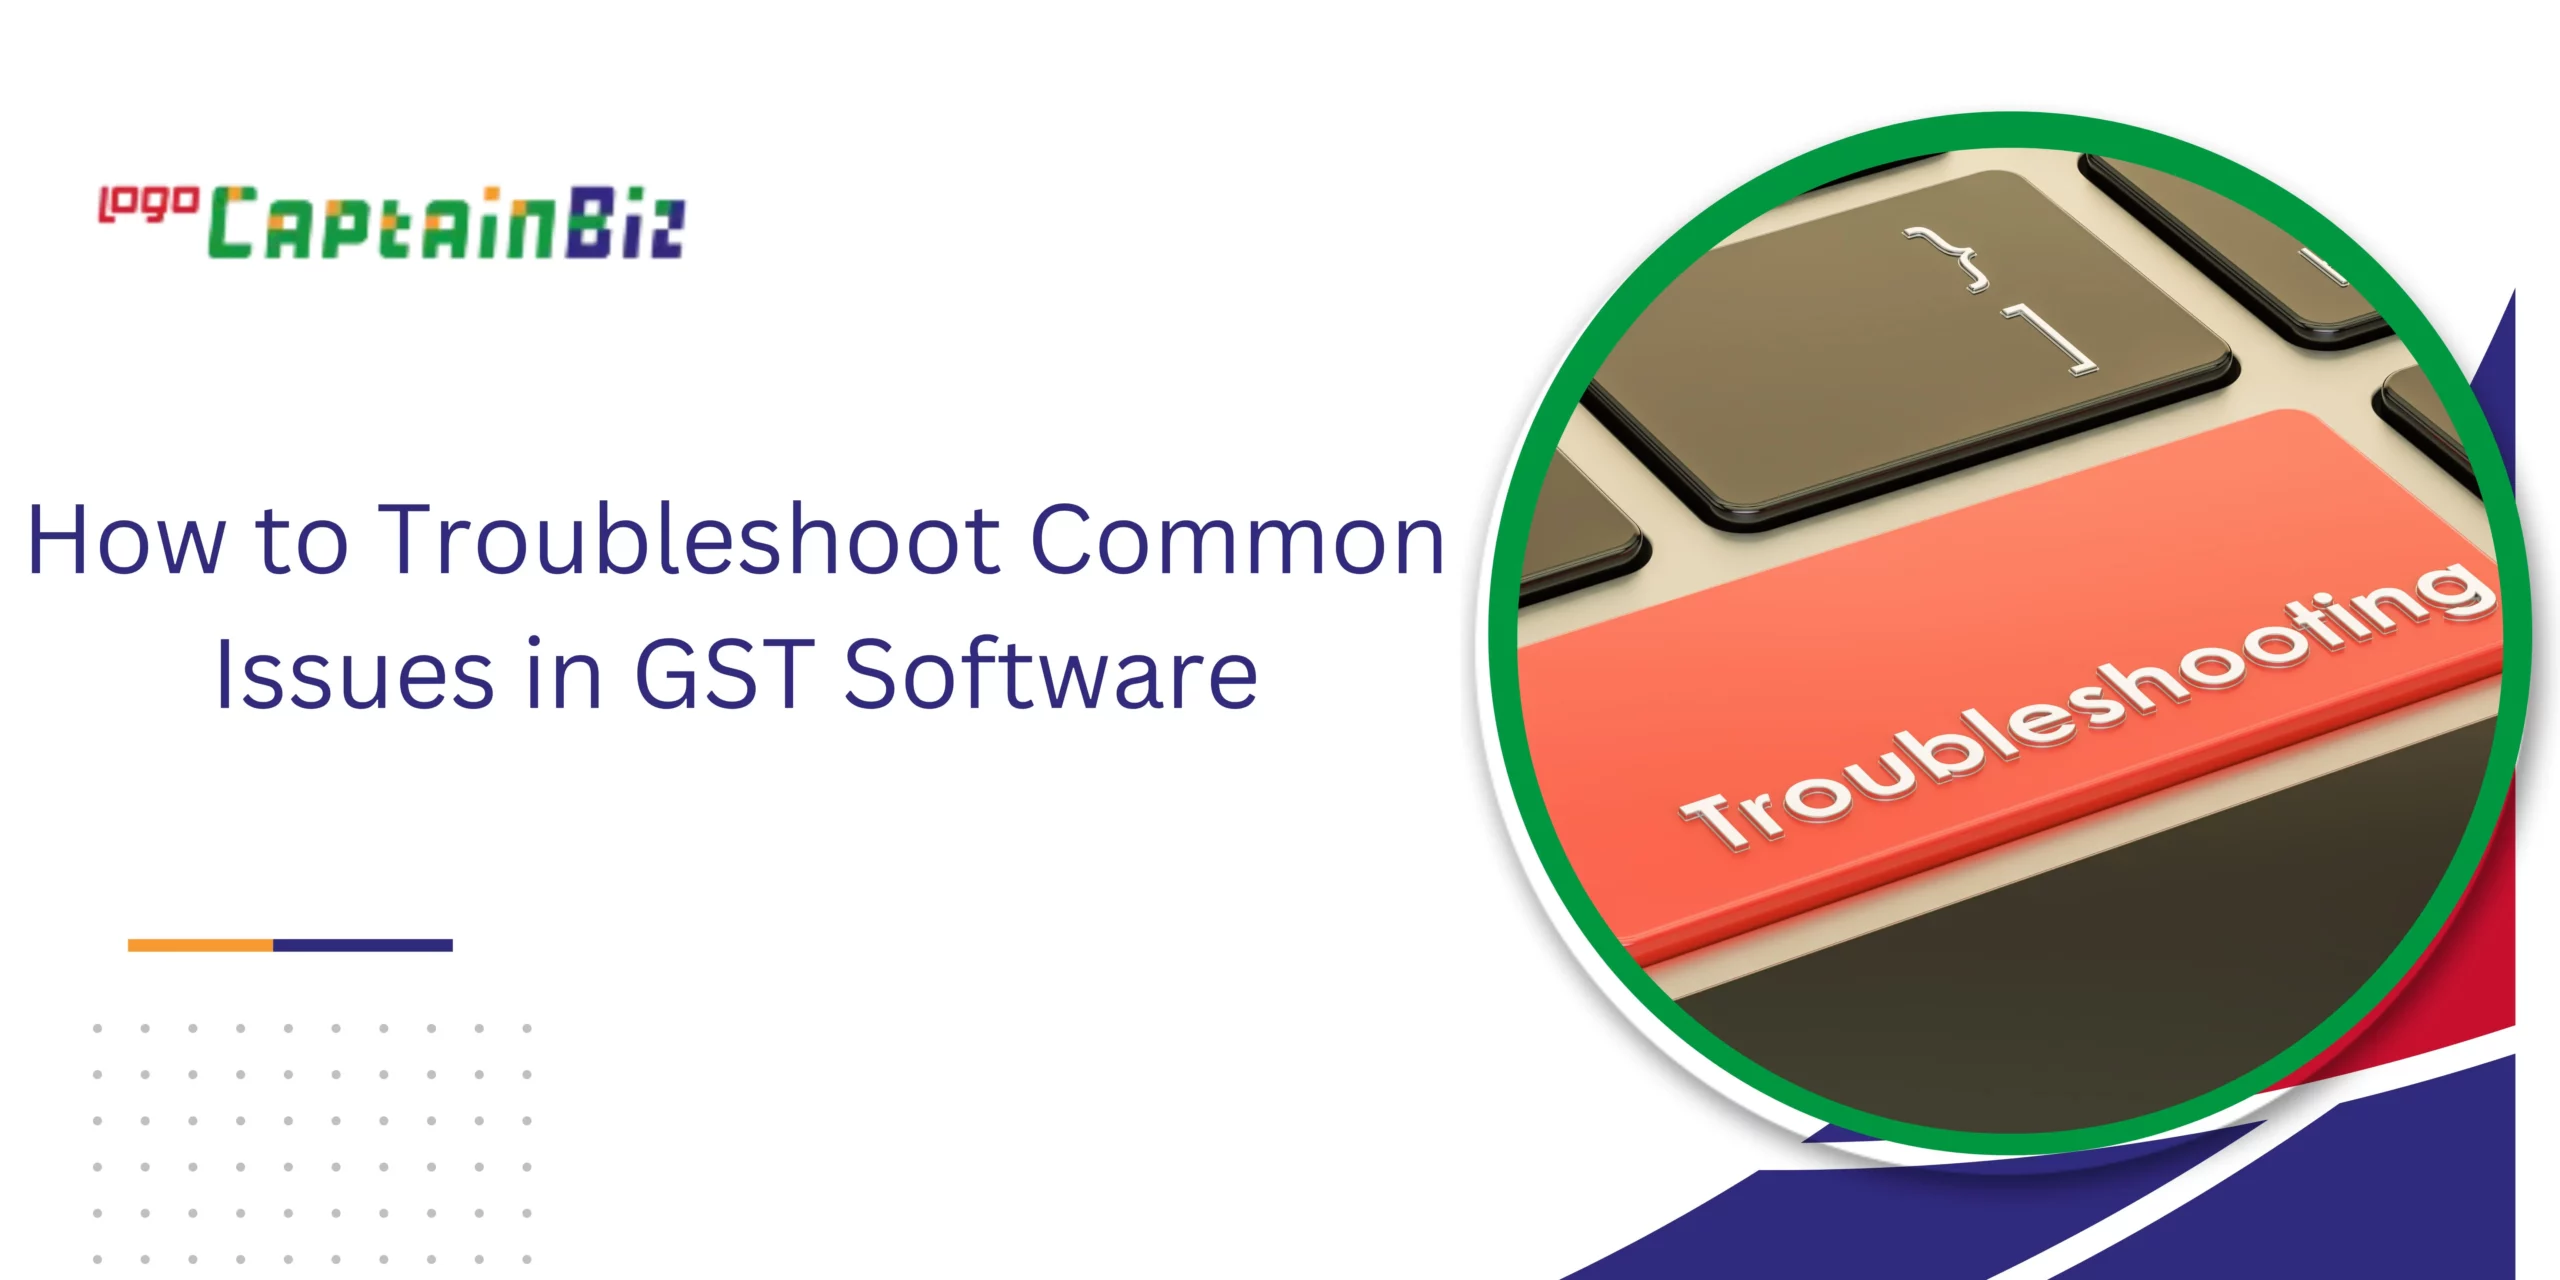 CaptainBiz: How to Troubleshoot Common Issues in GST Software